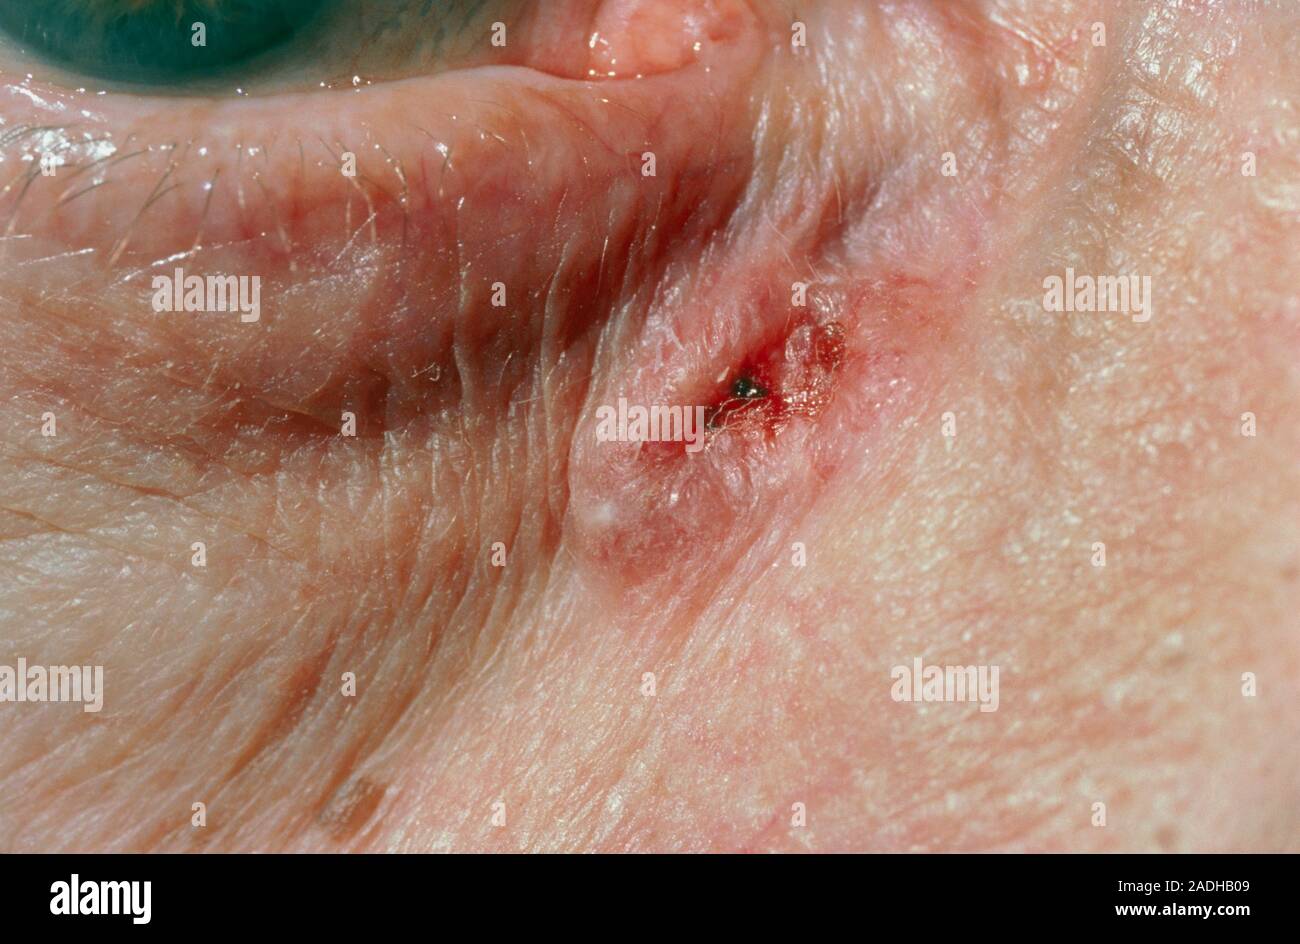 Rodent Ulcer Basal Cell Carcinoma Affecting The Skin Near The Eye